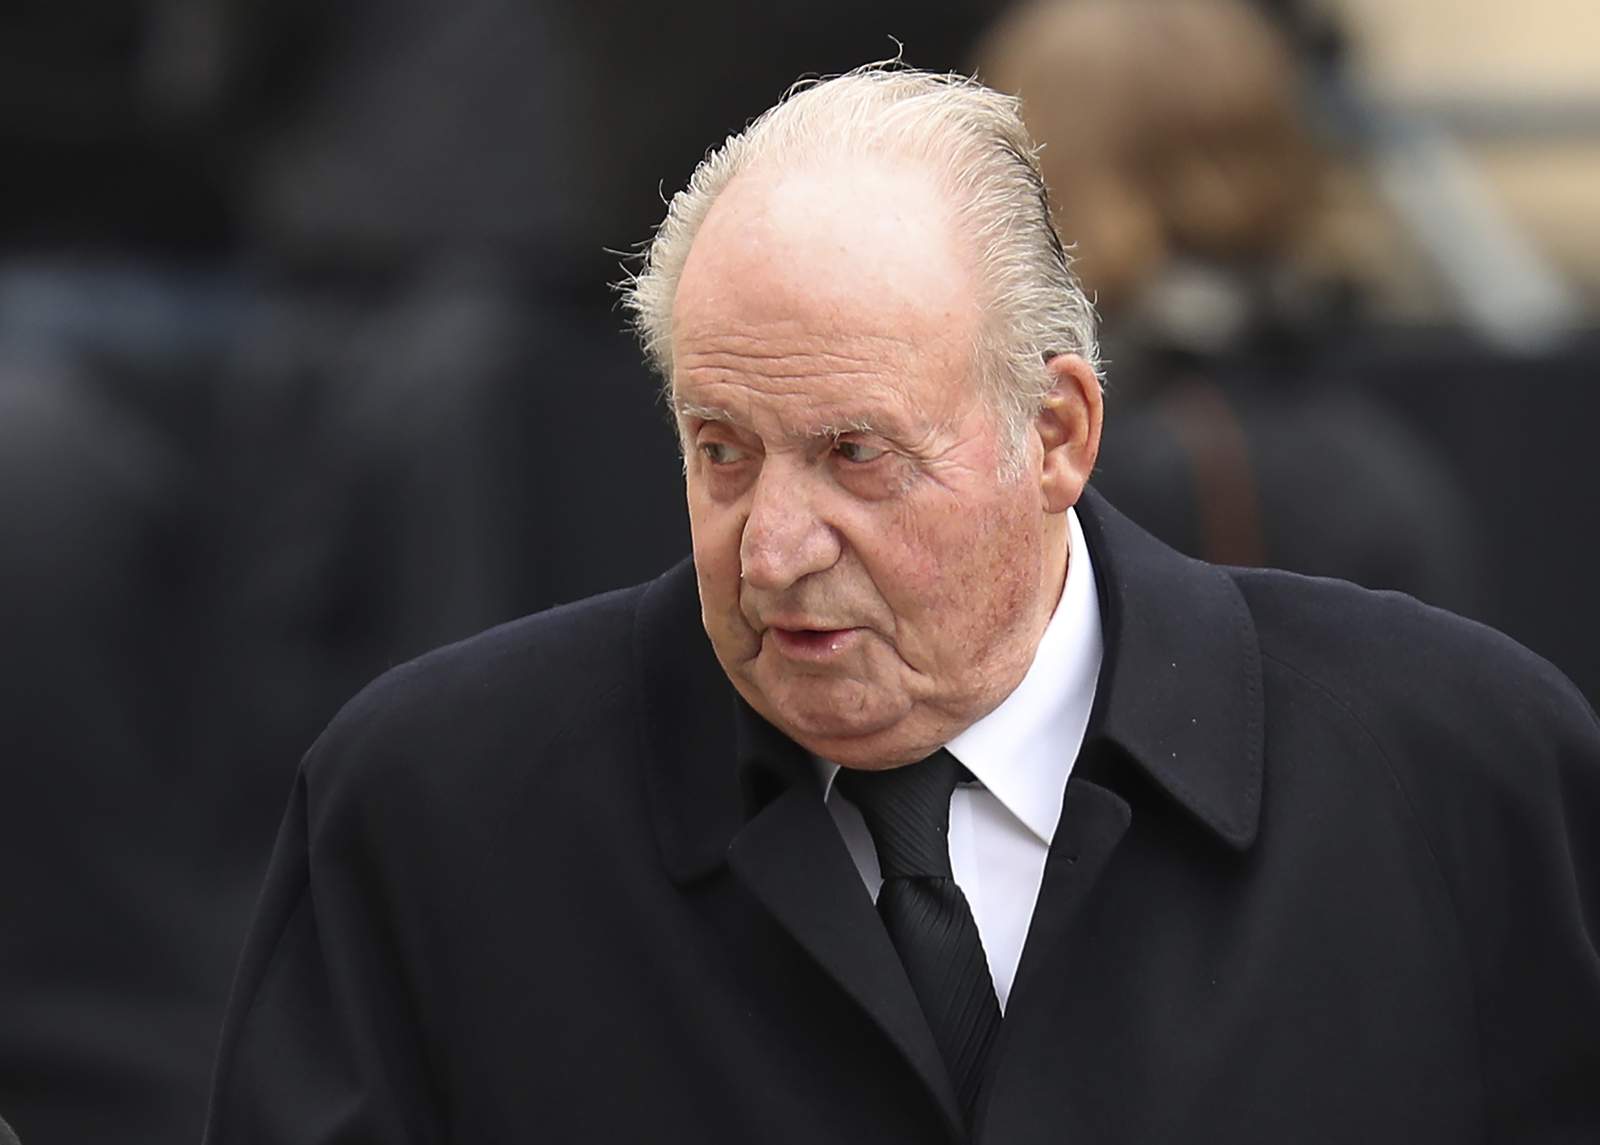 Spain's ex-king pays tax debt amid ongoing financial probes